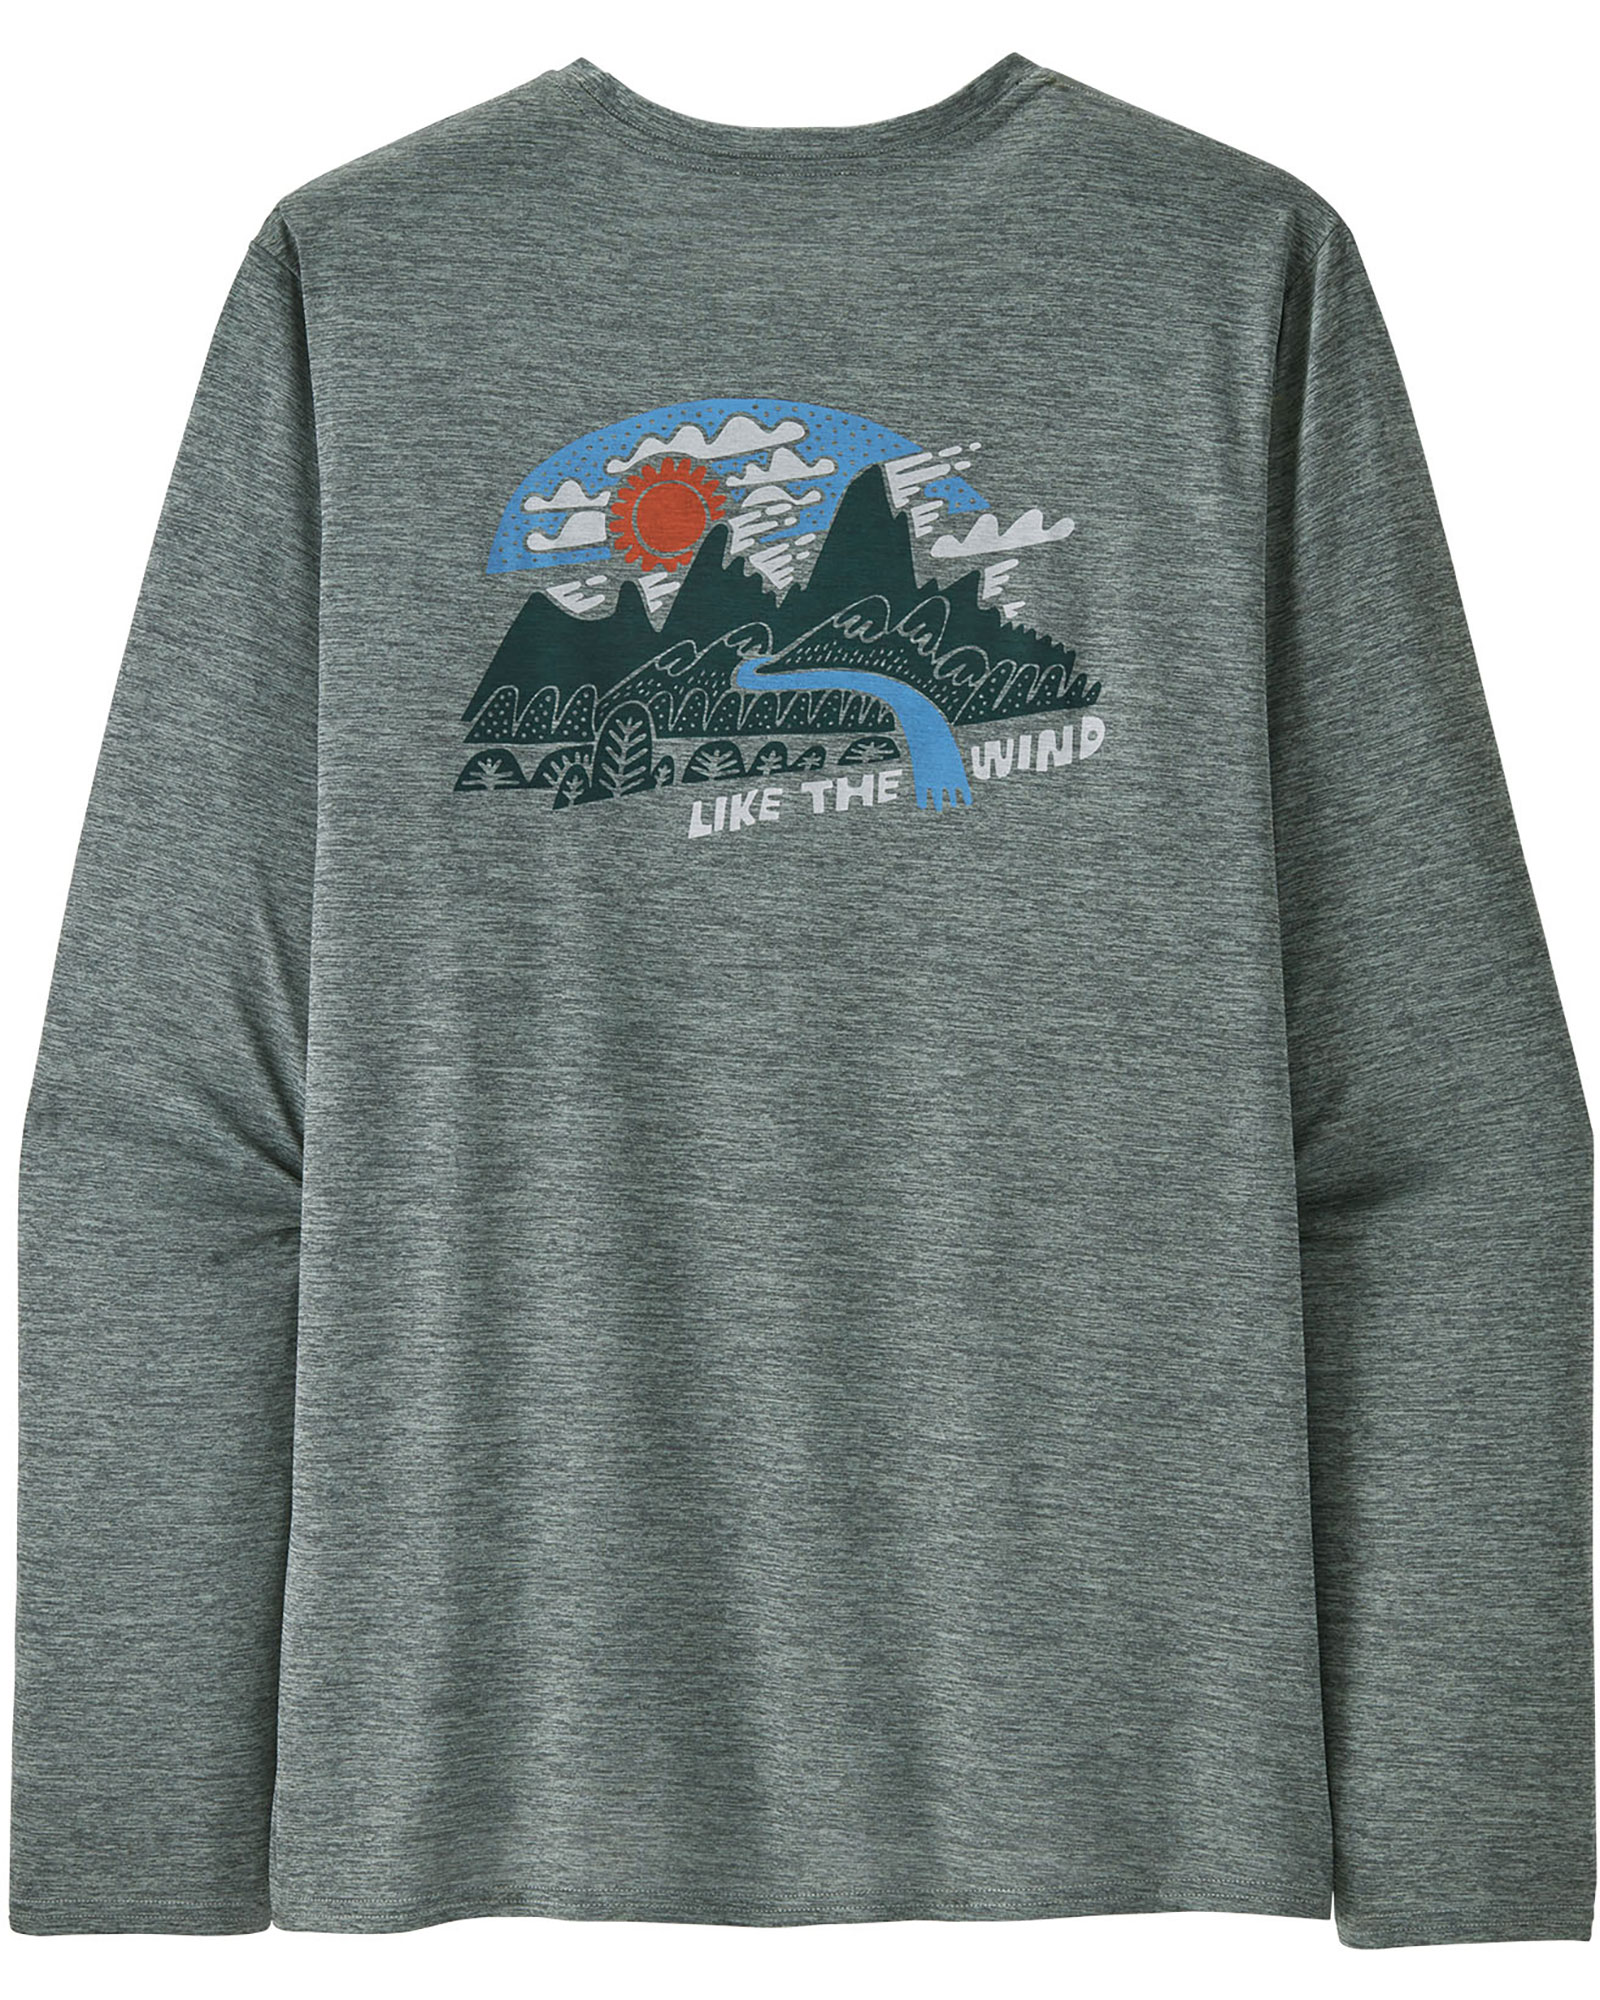 Patagonia Men’s Cap Cool Daily Graphic Long Sleeved Shirt - Like the Wind:Sleet Green X-Dye S